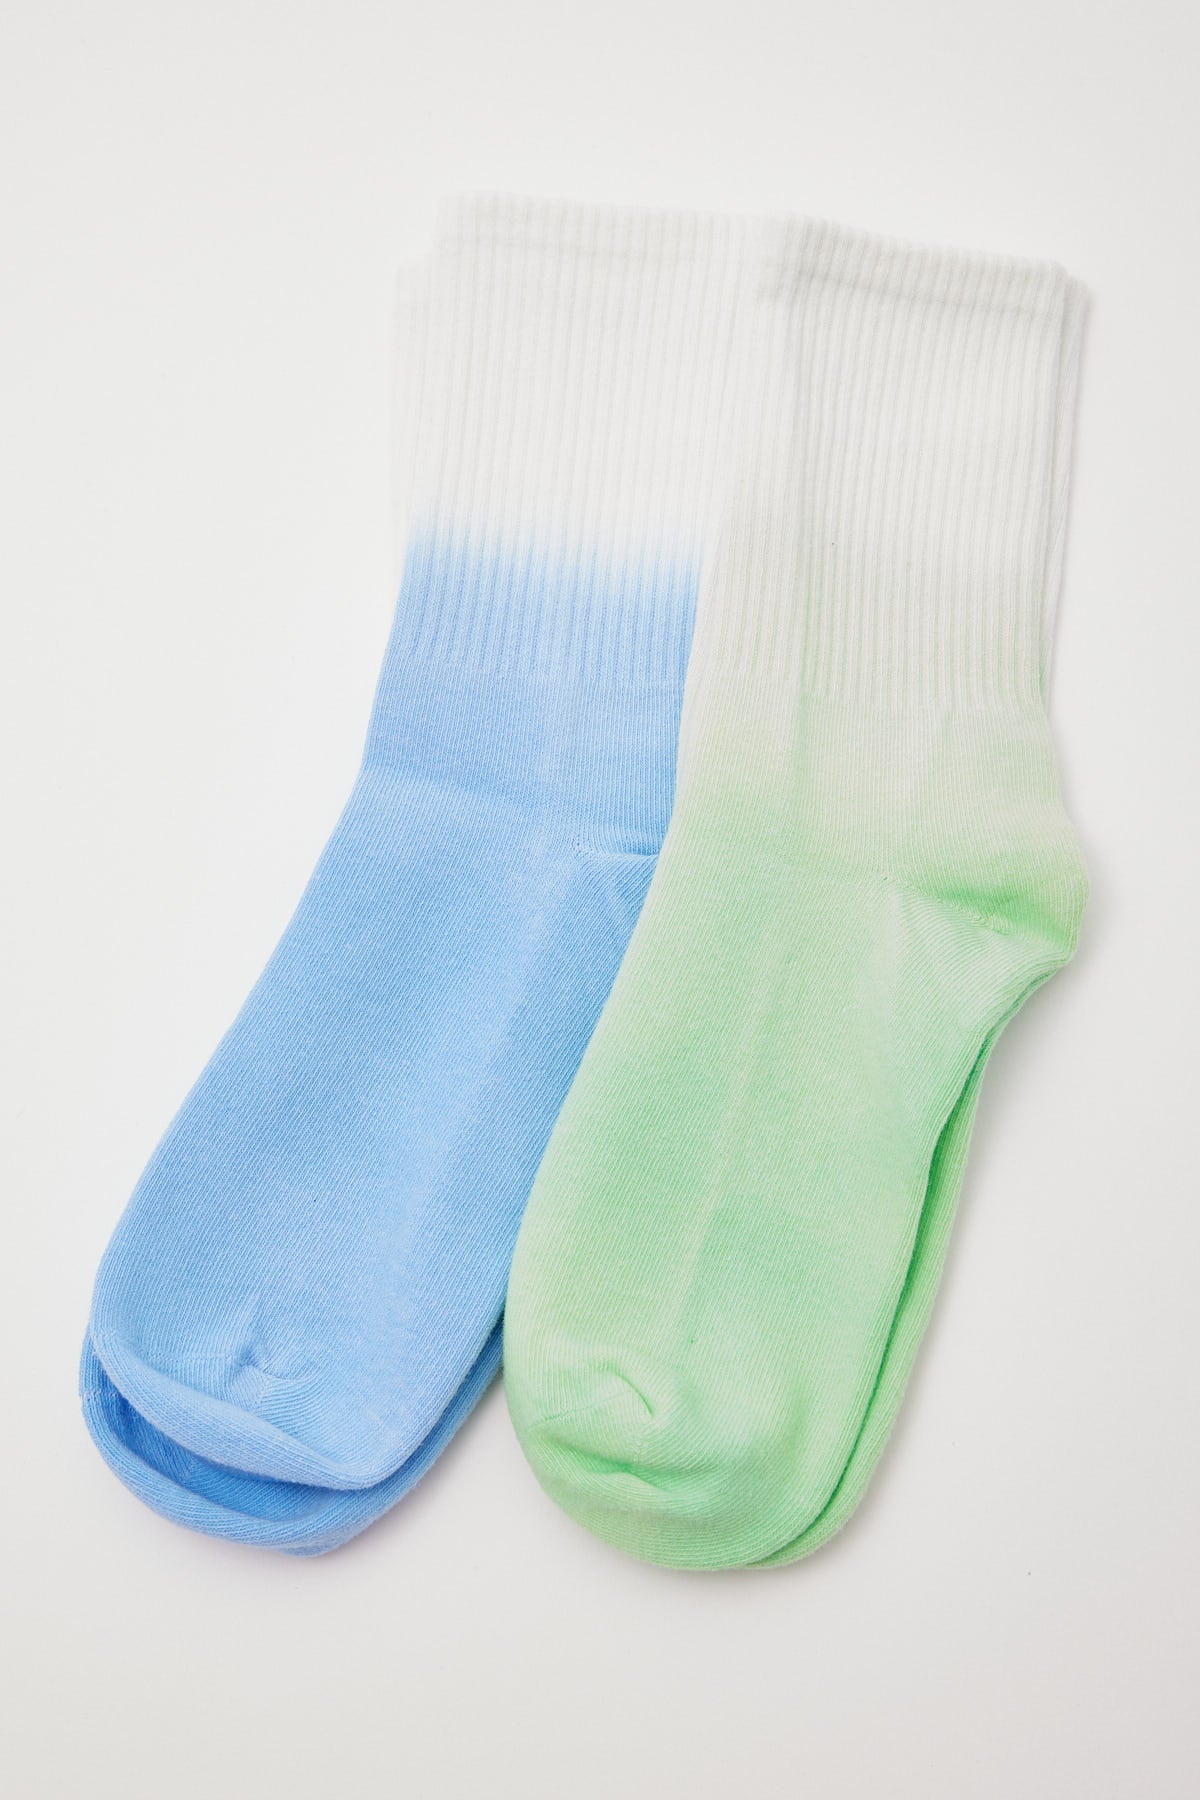 Luck & Trouble Ombre Sock 2 Pack Blue Print